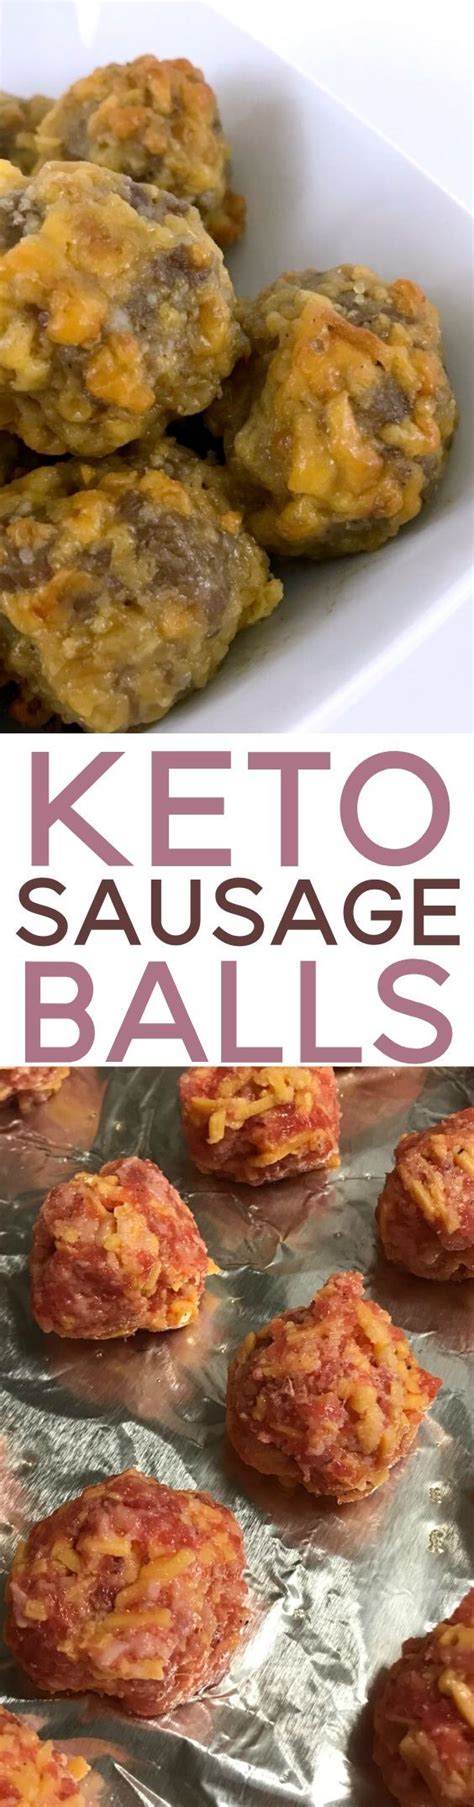 These Keto Sausage Balls Are A Crowd Favorite Made With No Flour At All These Low Carb